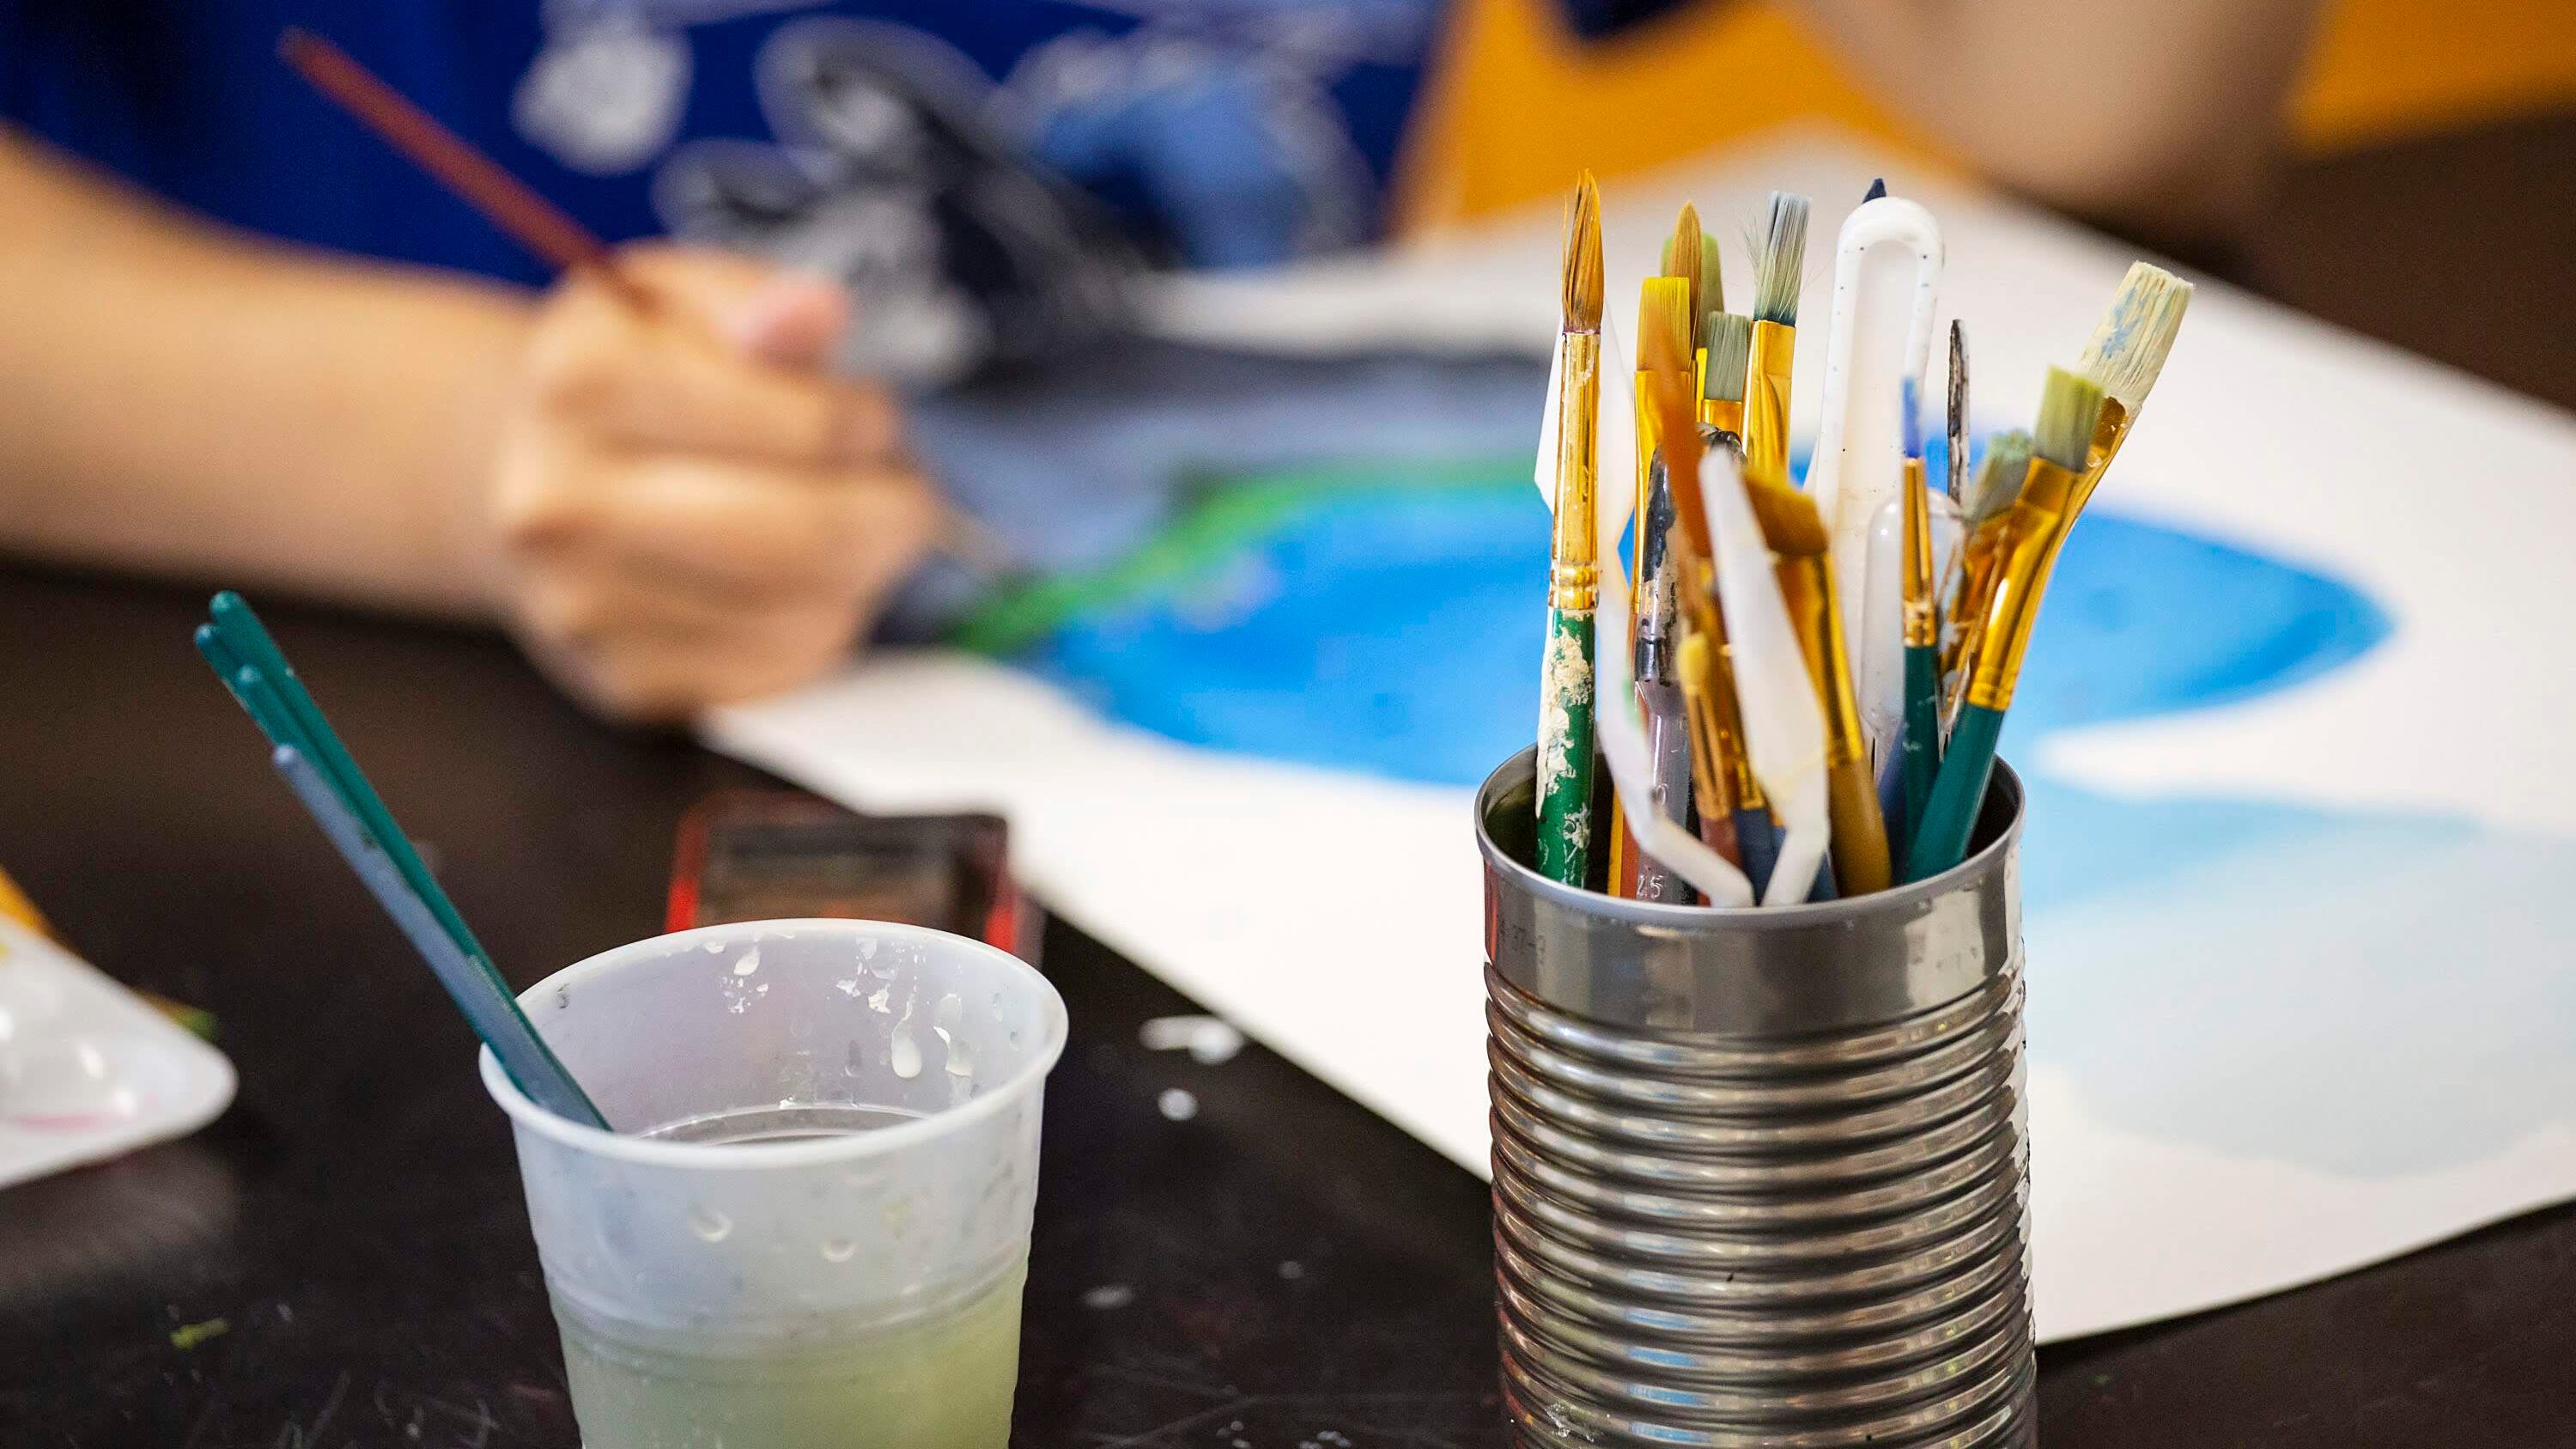 A close-up photo of a tin can full of paintbrushes. In the background, a student paints in art class.